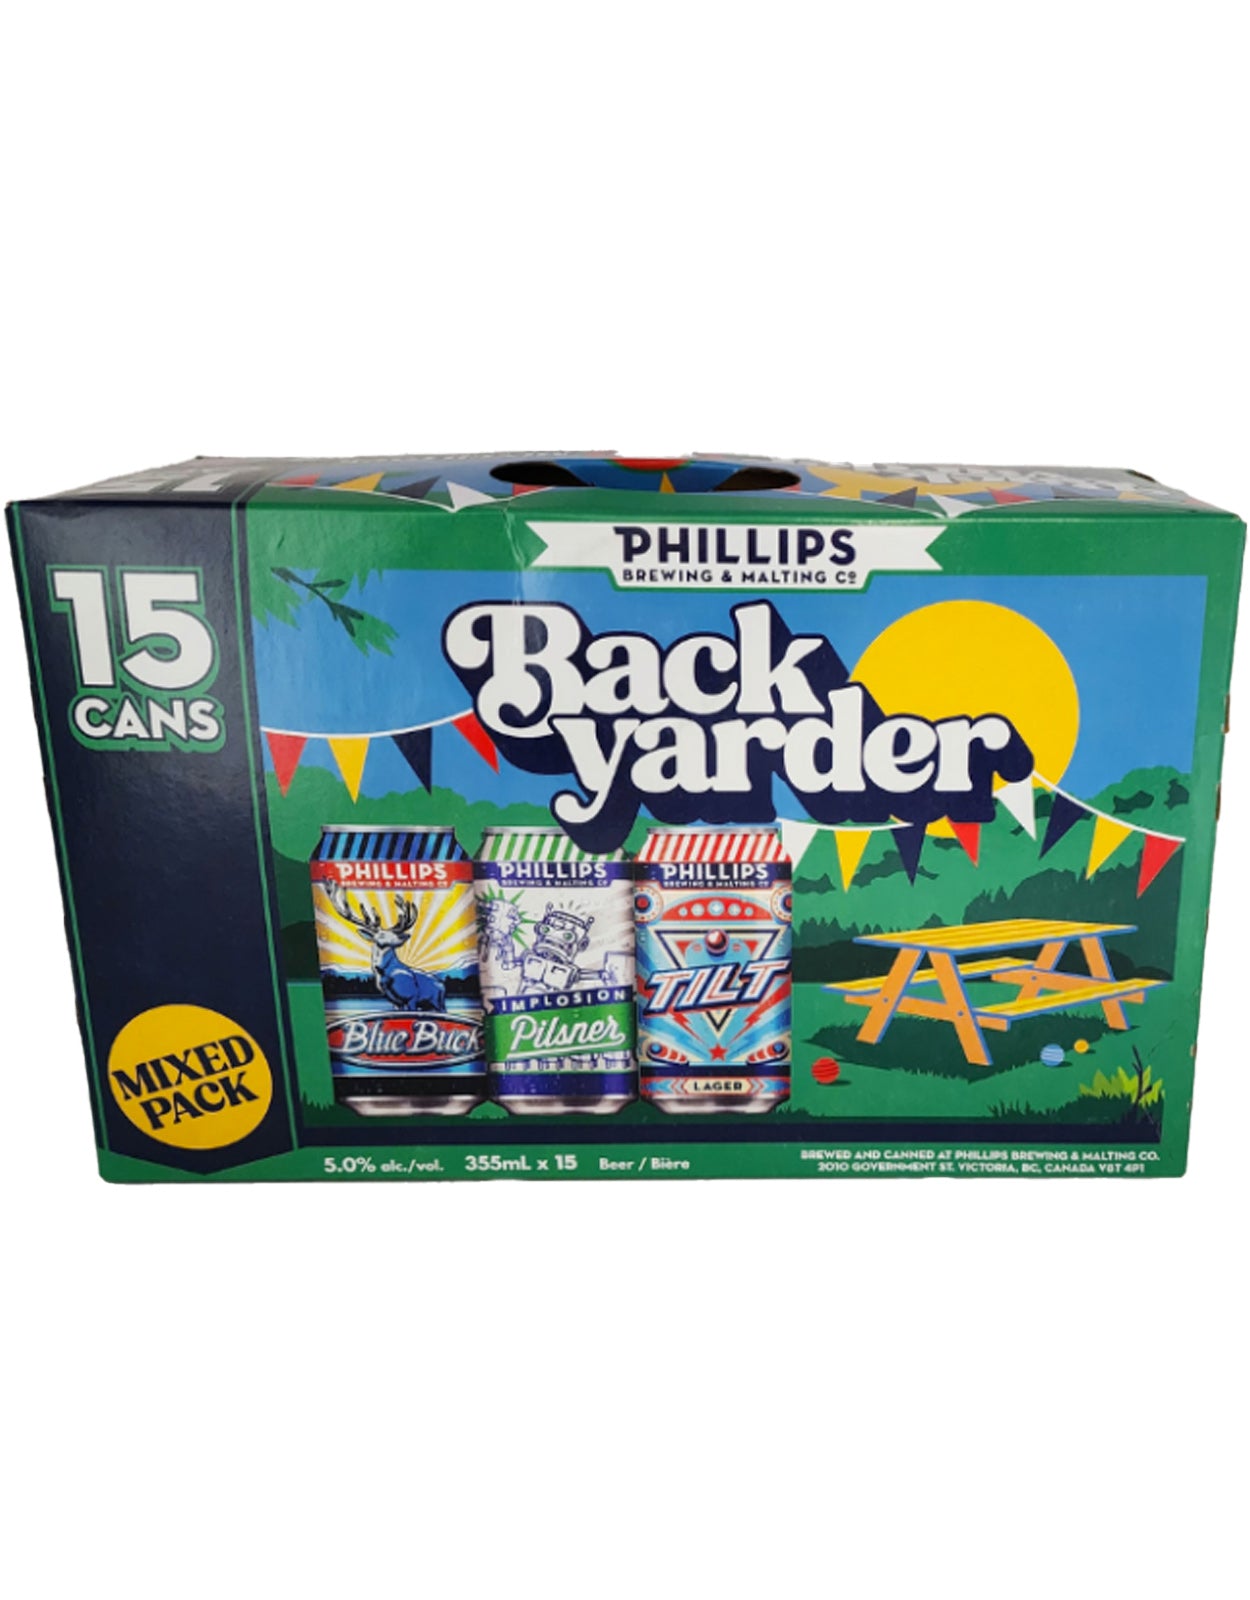 Phillips Backyarder Mixed Pack 355ml - 15 Cans